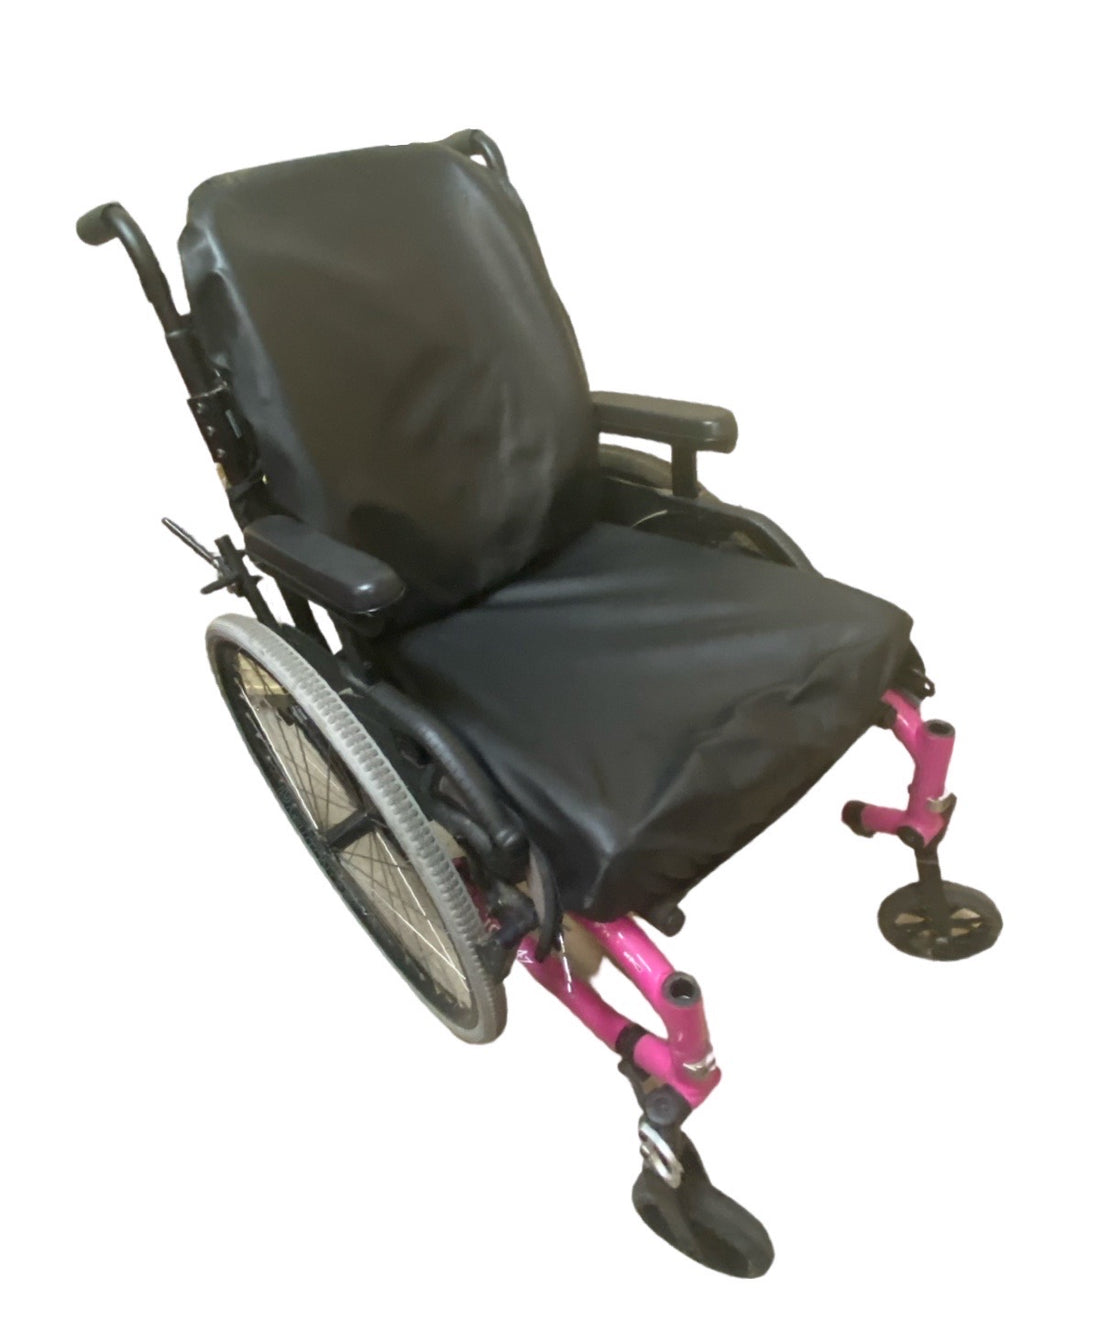 The Spray & Wipe Solution for Wheelchair Seats